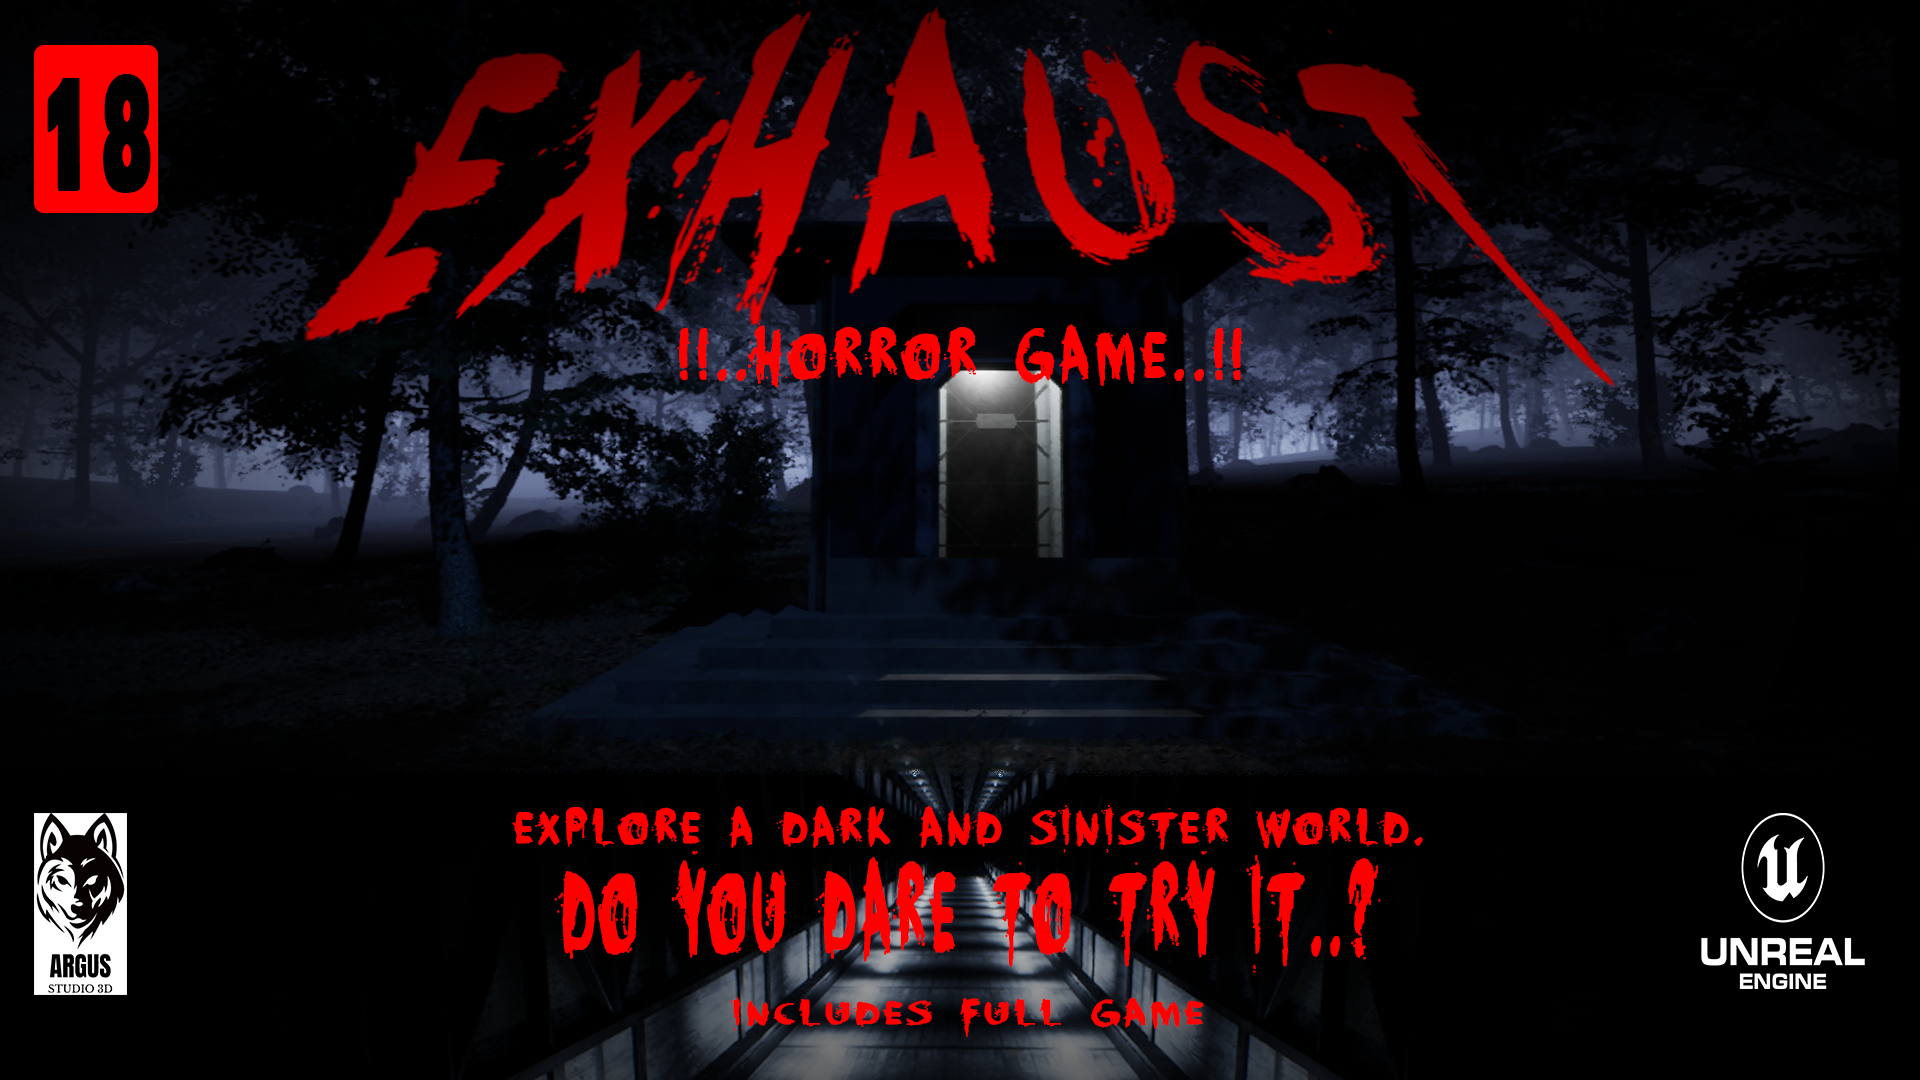 EXHAUST horror game